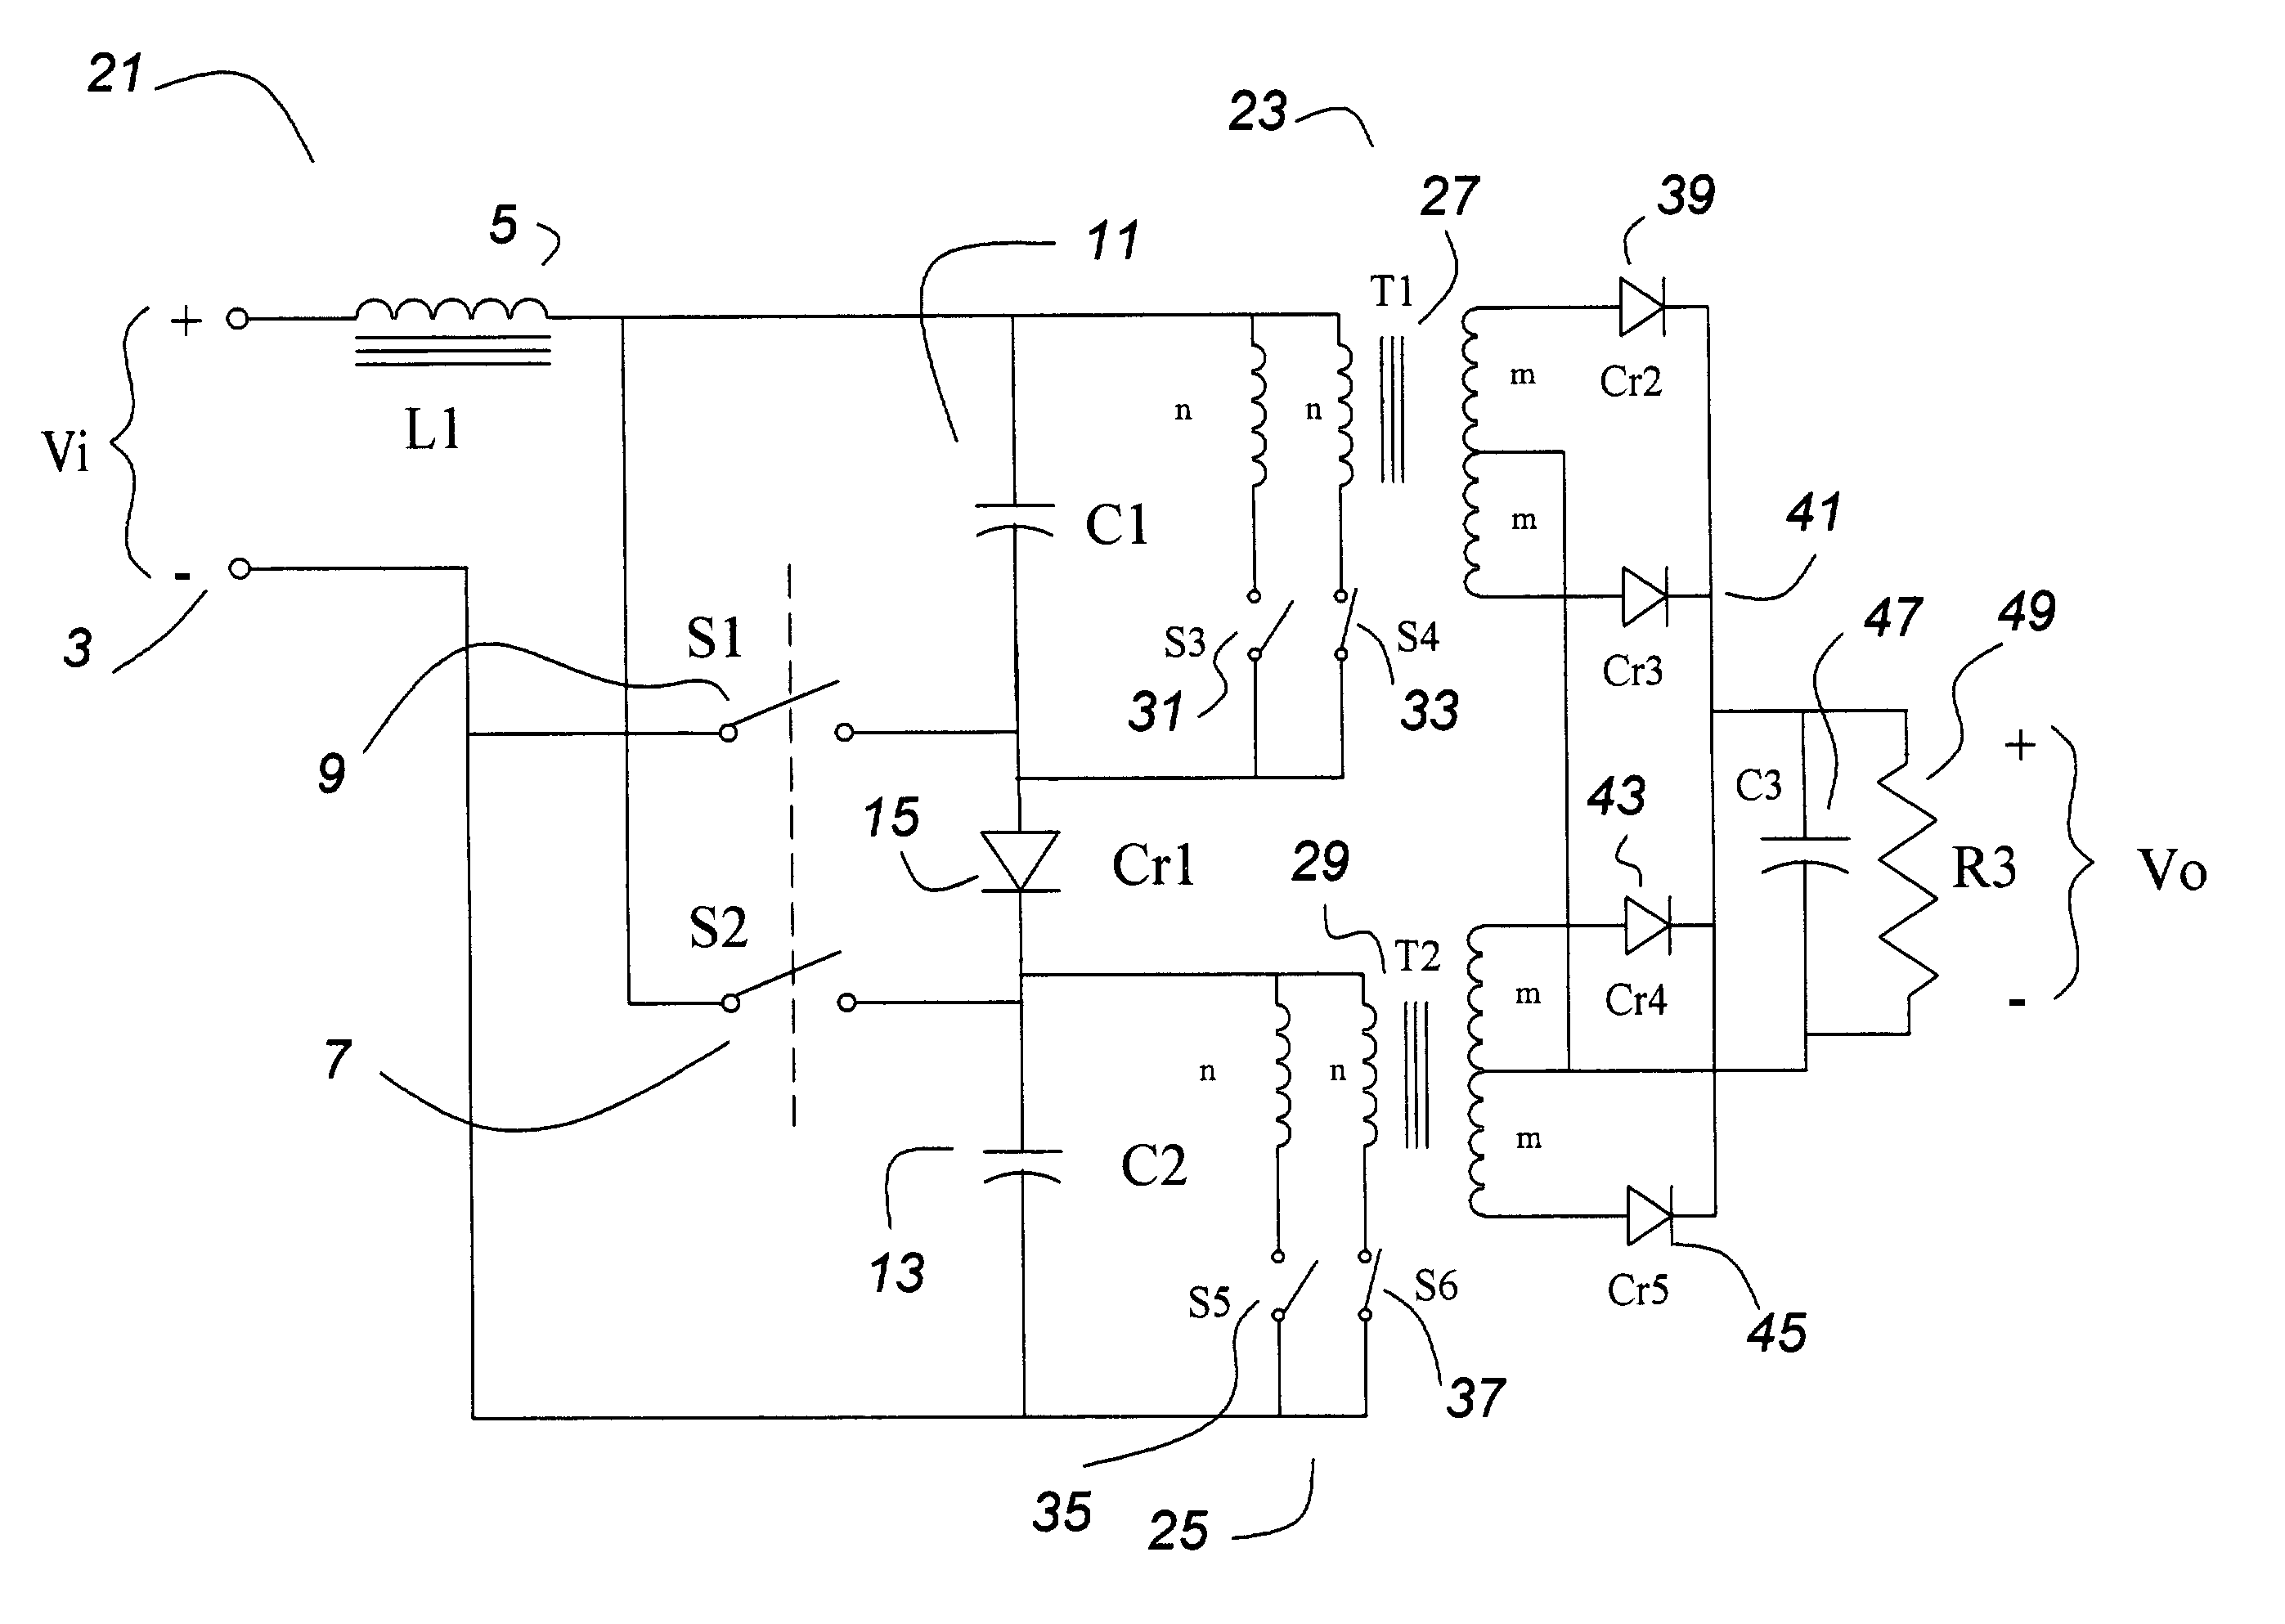 Power converter with an inductor input and switched capacitor outputs